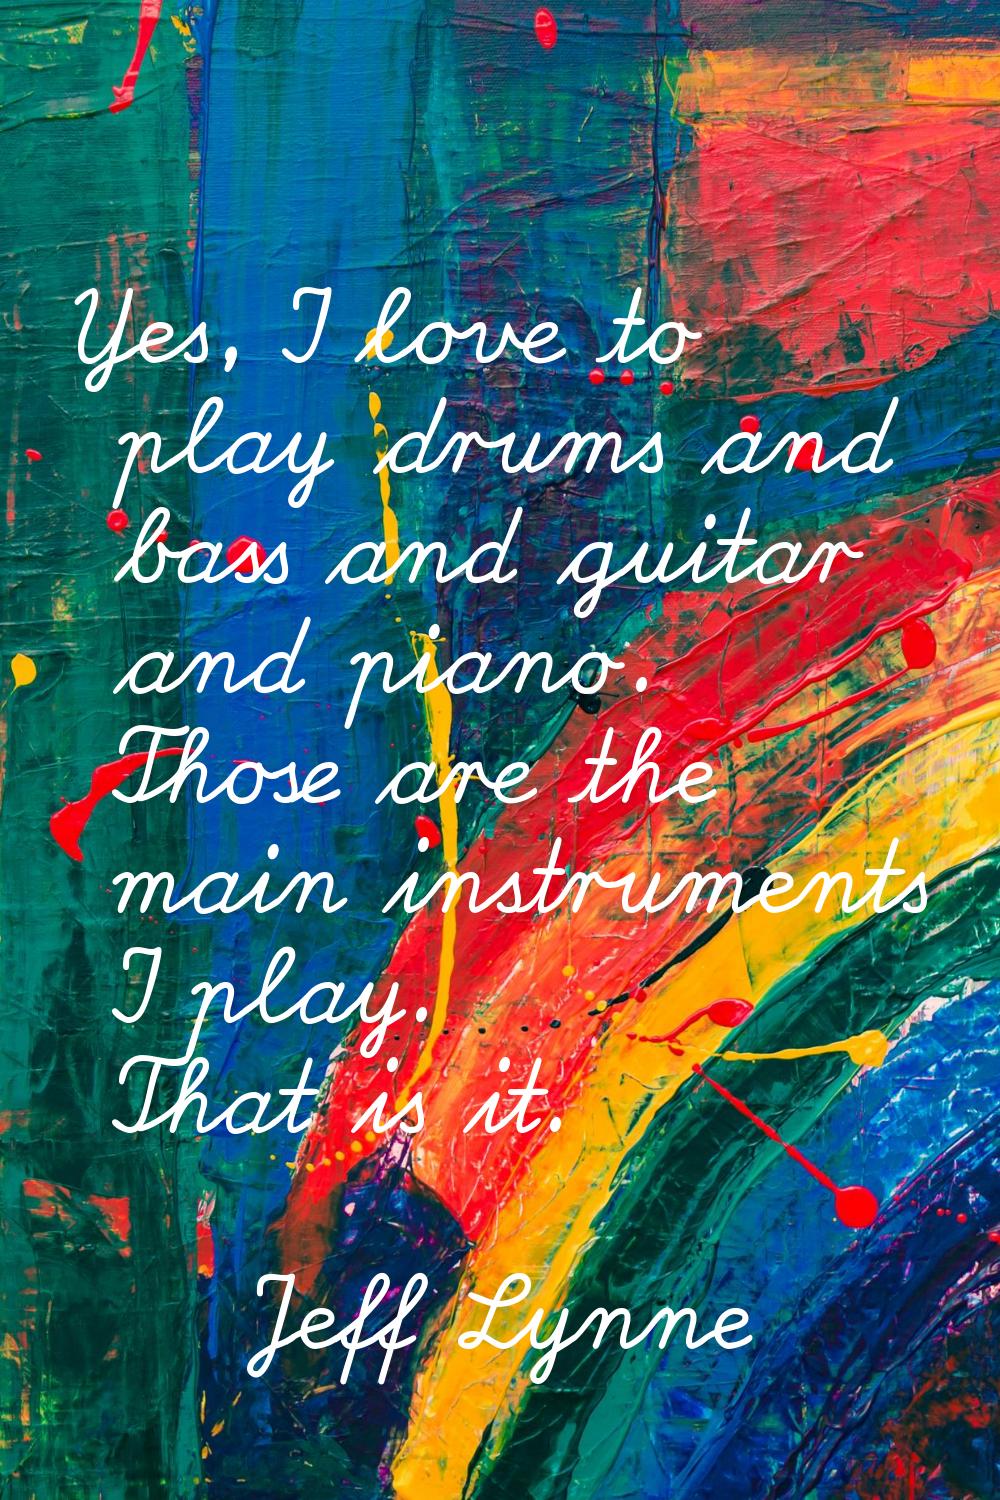 Yes, I love to play drums and bass and guitar and piano. Those are the main instruments I play. Tha